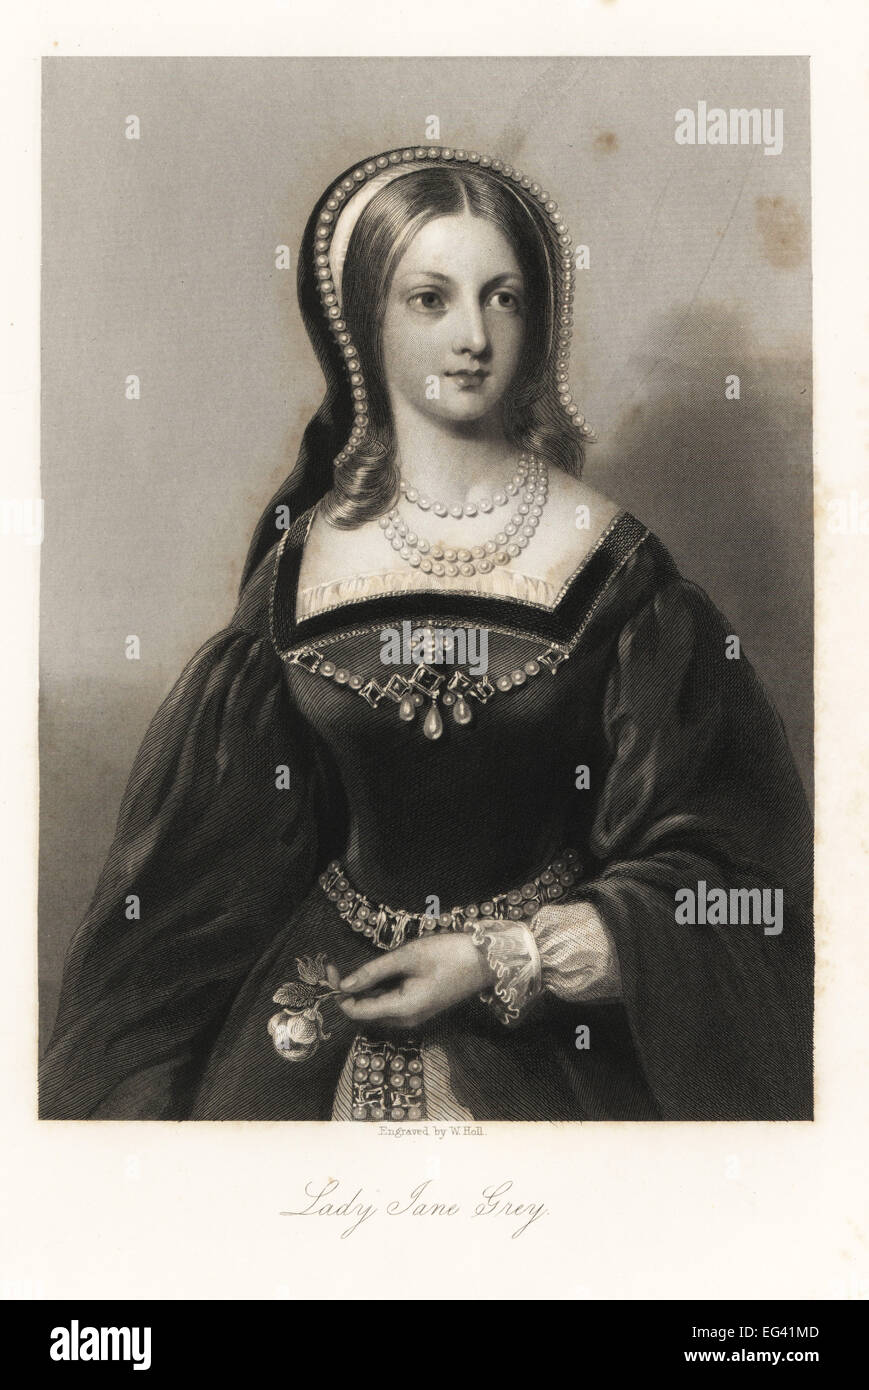 Lady Jane Grey, the Nine Days Queen of England. Stock Photo